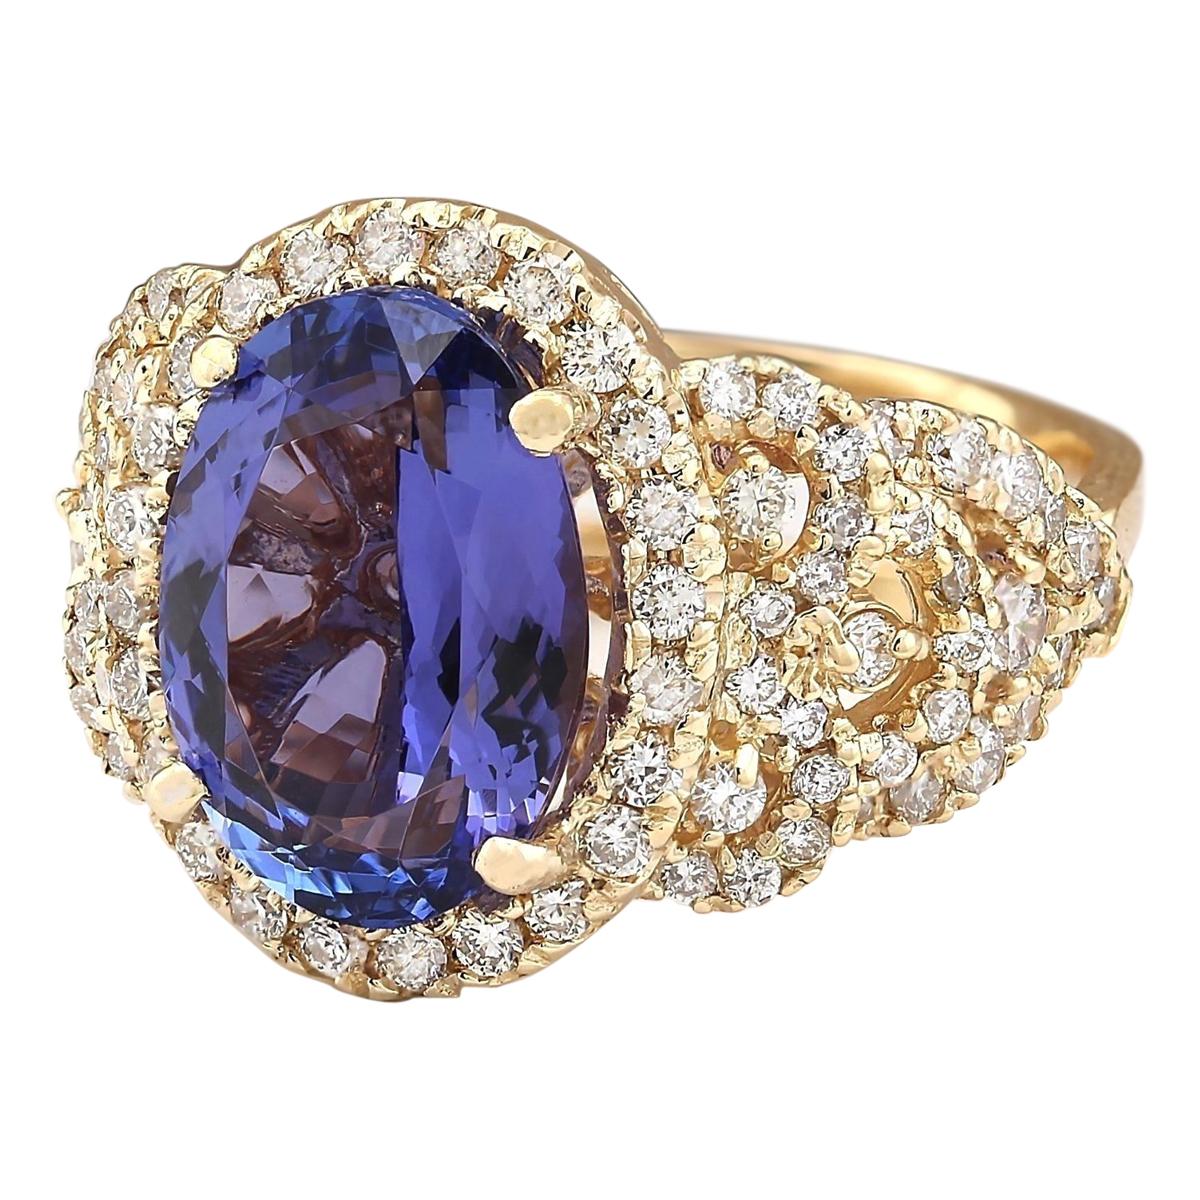 Introducing our exquisite 14 Karat Yellow Gold Diamond Ring, featuring a captivating 7.55 Carat Tanzanite centerpiece, stamped for authenticity. Crafted with precision and elegance, this ring exudes luxury and sophistication. Weighing 10.4 grams, it